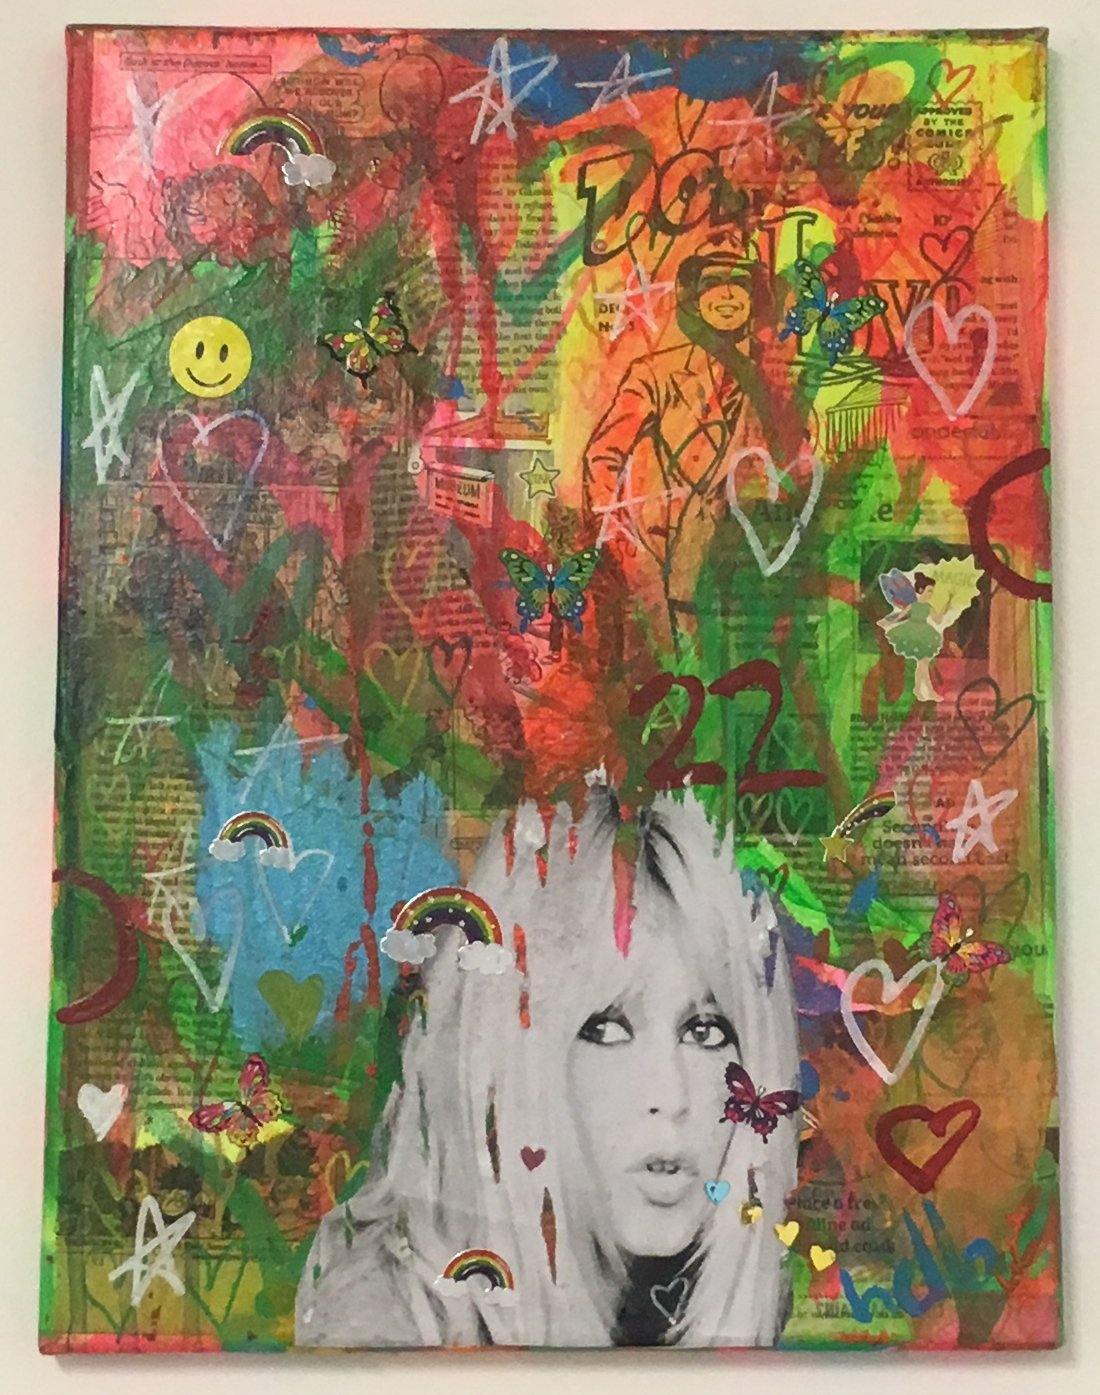 Spin the world falling star by Barrie J Davies 2018, mixed media on canvas. Pop Art and Street art inspired Artist based in Brighton England UK.